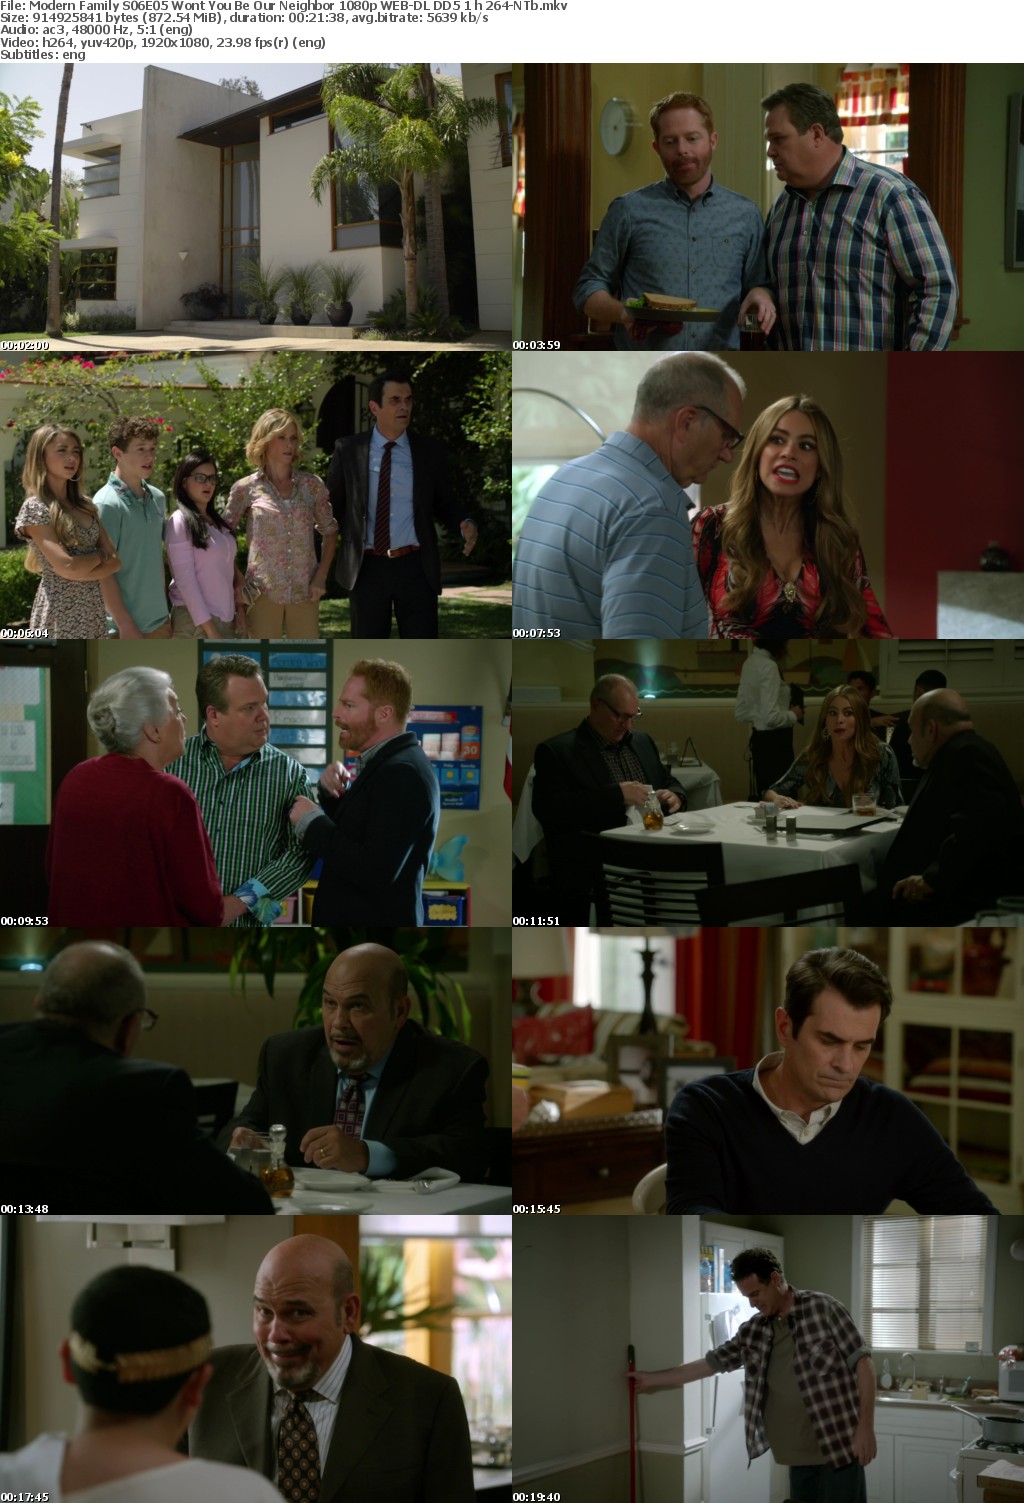 Modern Family S06E05 Wont You Be Our Neighbor 1080p WEB-DL DD5 1 h 264-NTb